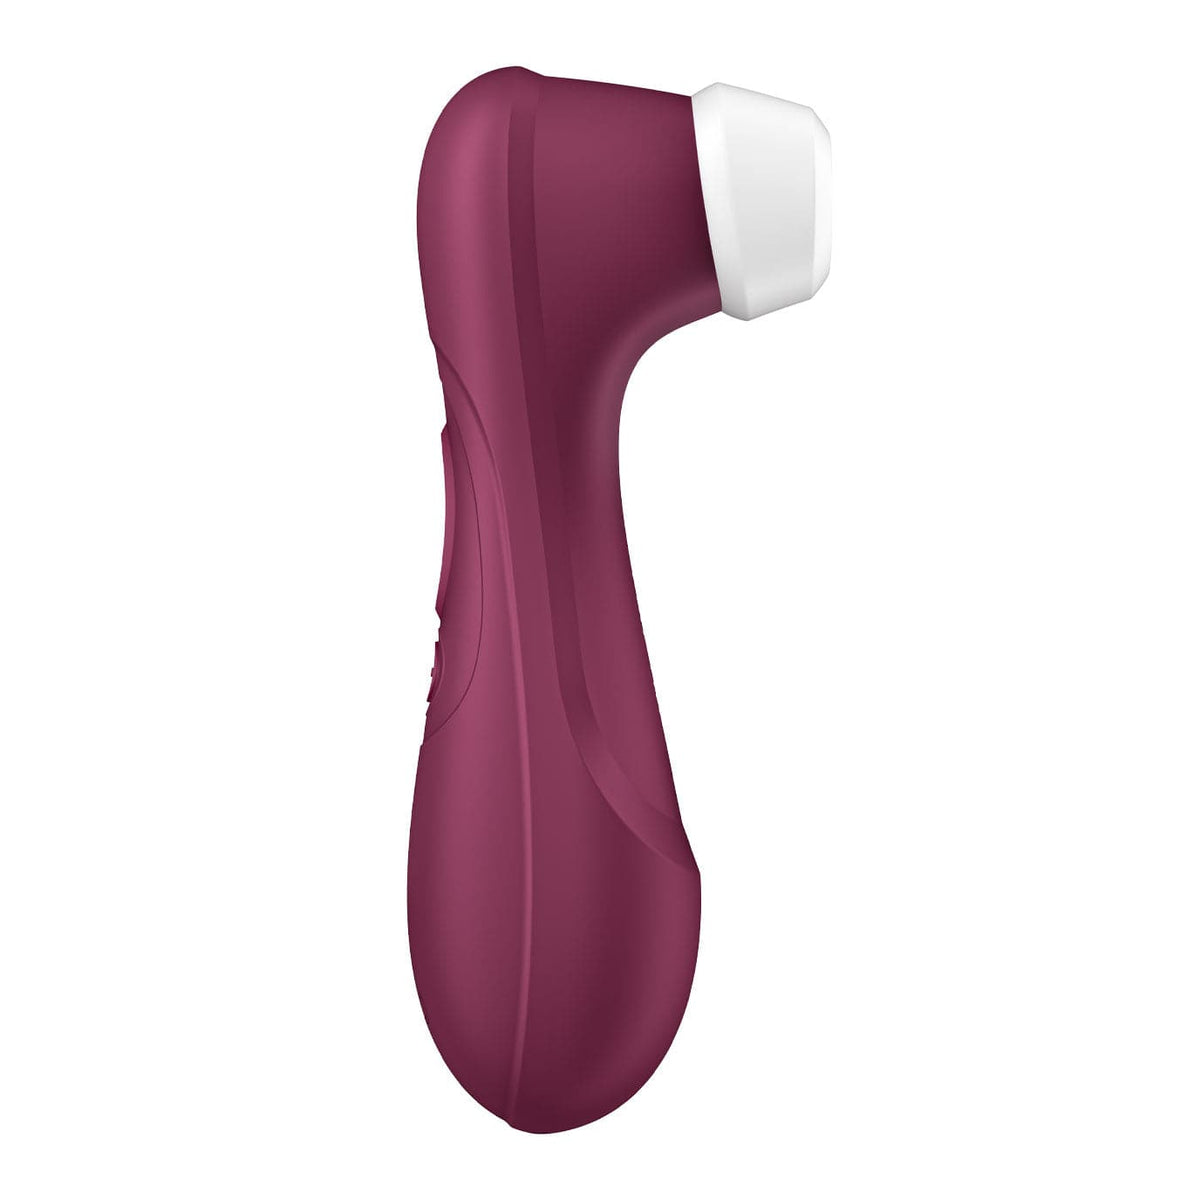 satisfyer pro 2 generation 3 connect app liquid air technology wine red